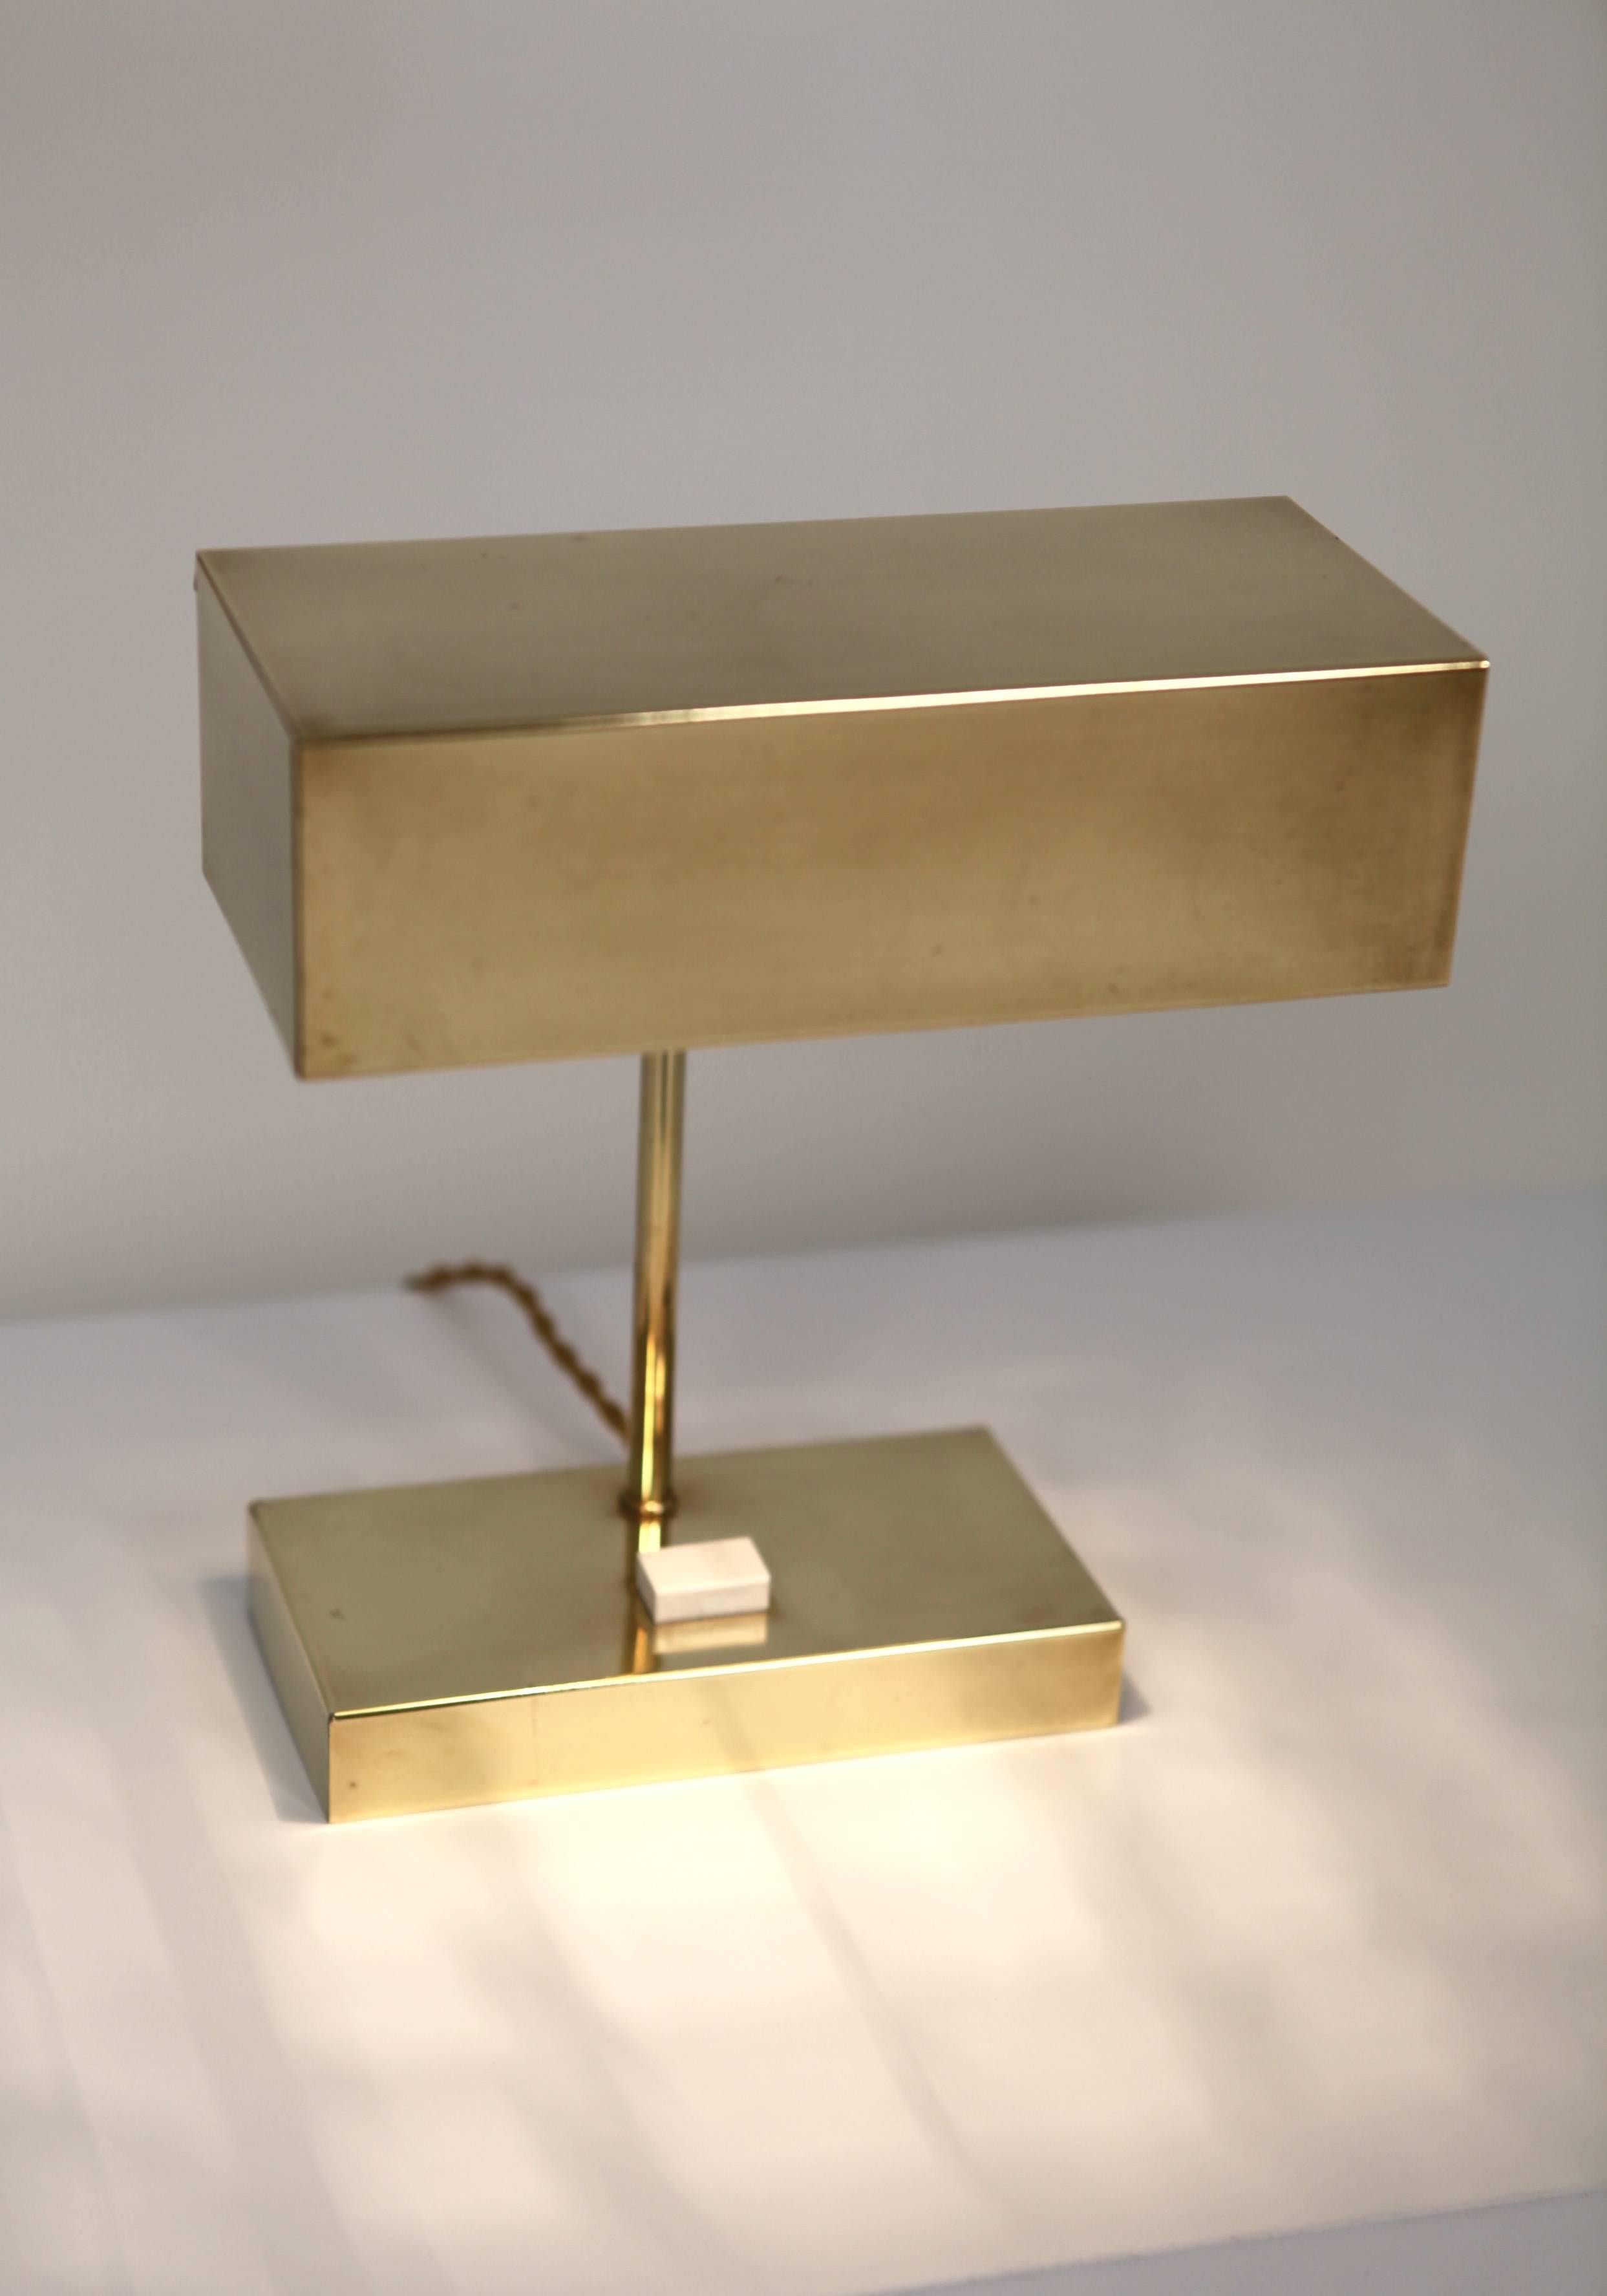 Hans Agne Jacobsson.
Table lamp in brass
Manufactured by Elidus in Sweden 1960s.
Rewired.